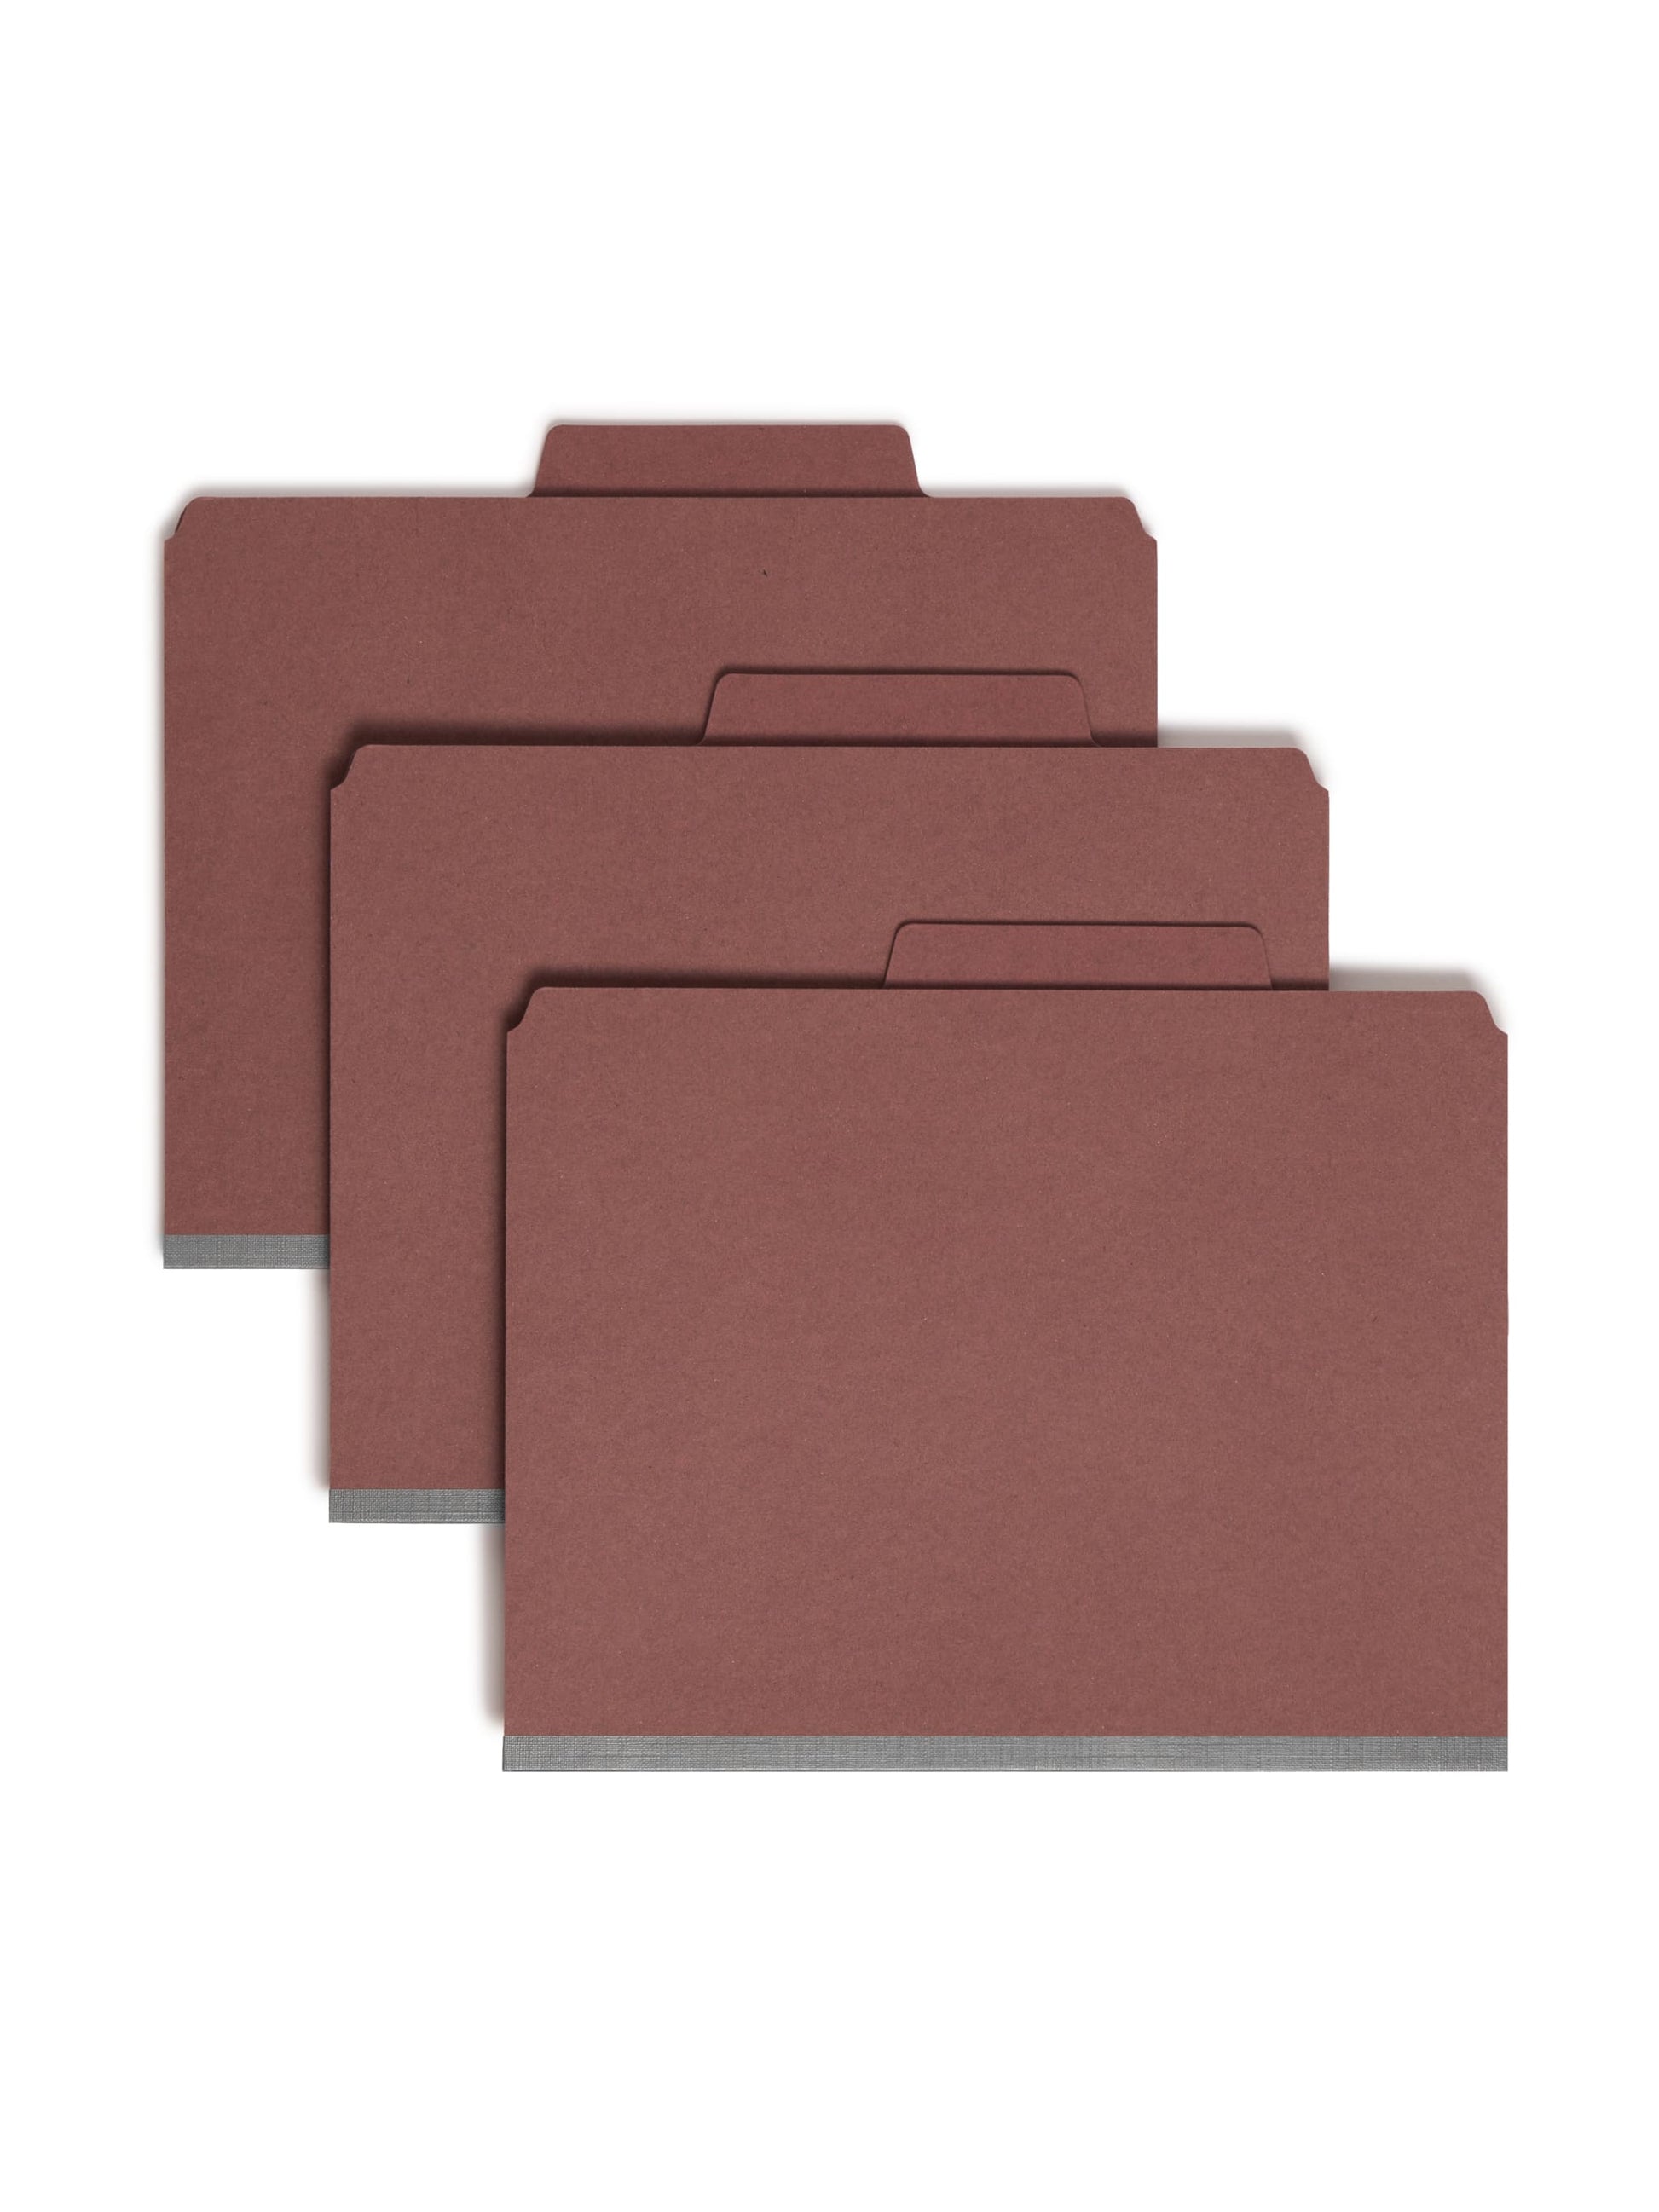 SuperTab® Classification File Folders, Red Color, Letter Size, Set of 0, 30086486140707